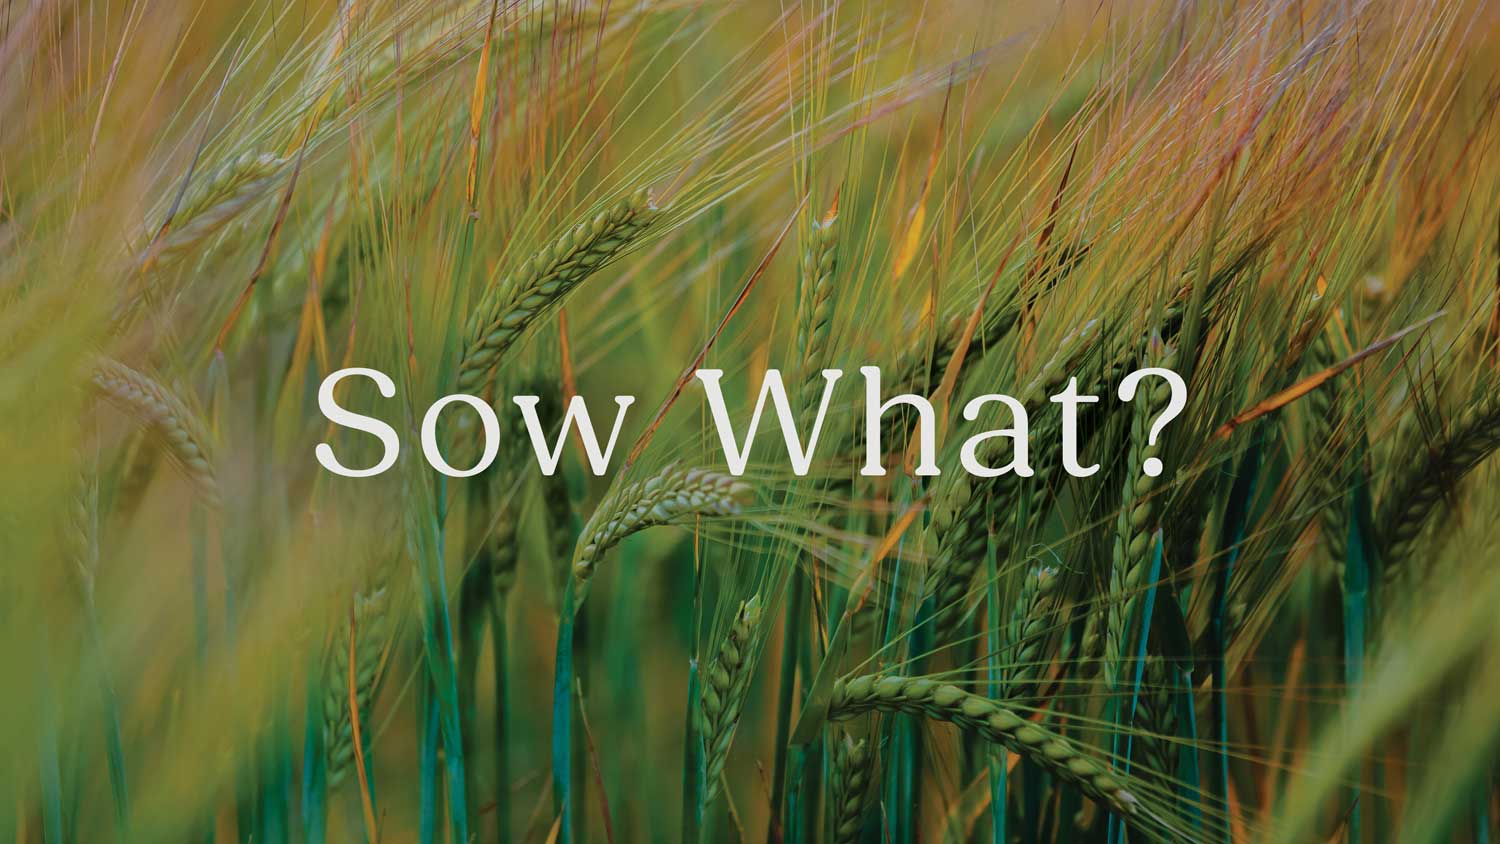 Sow What?